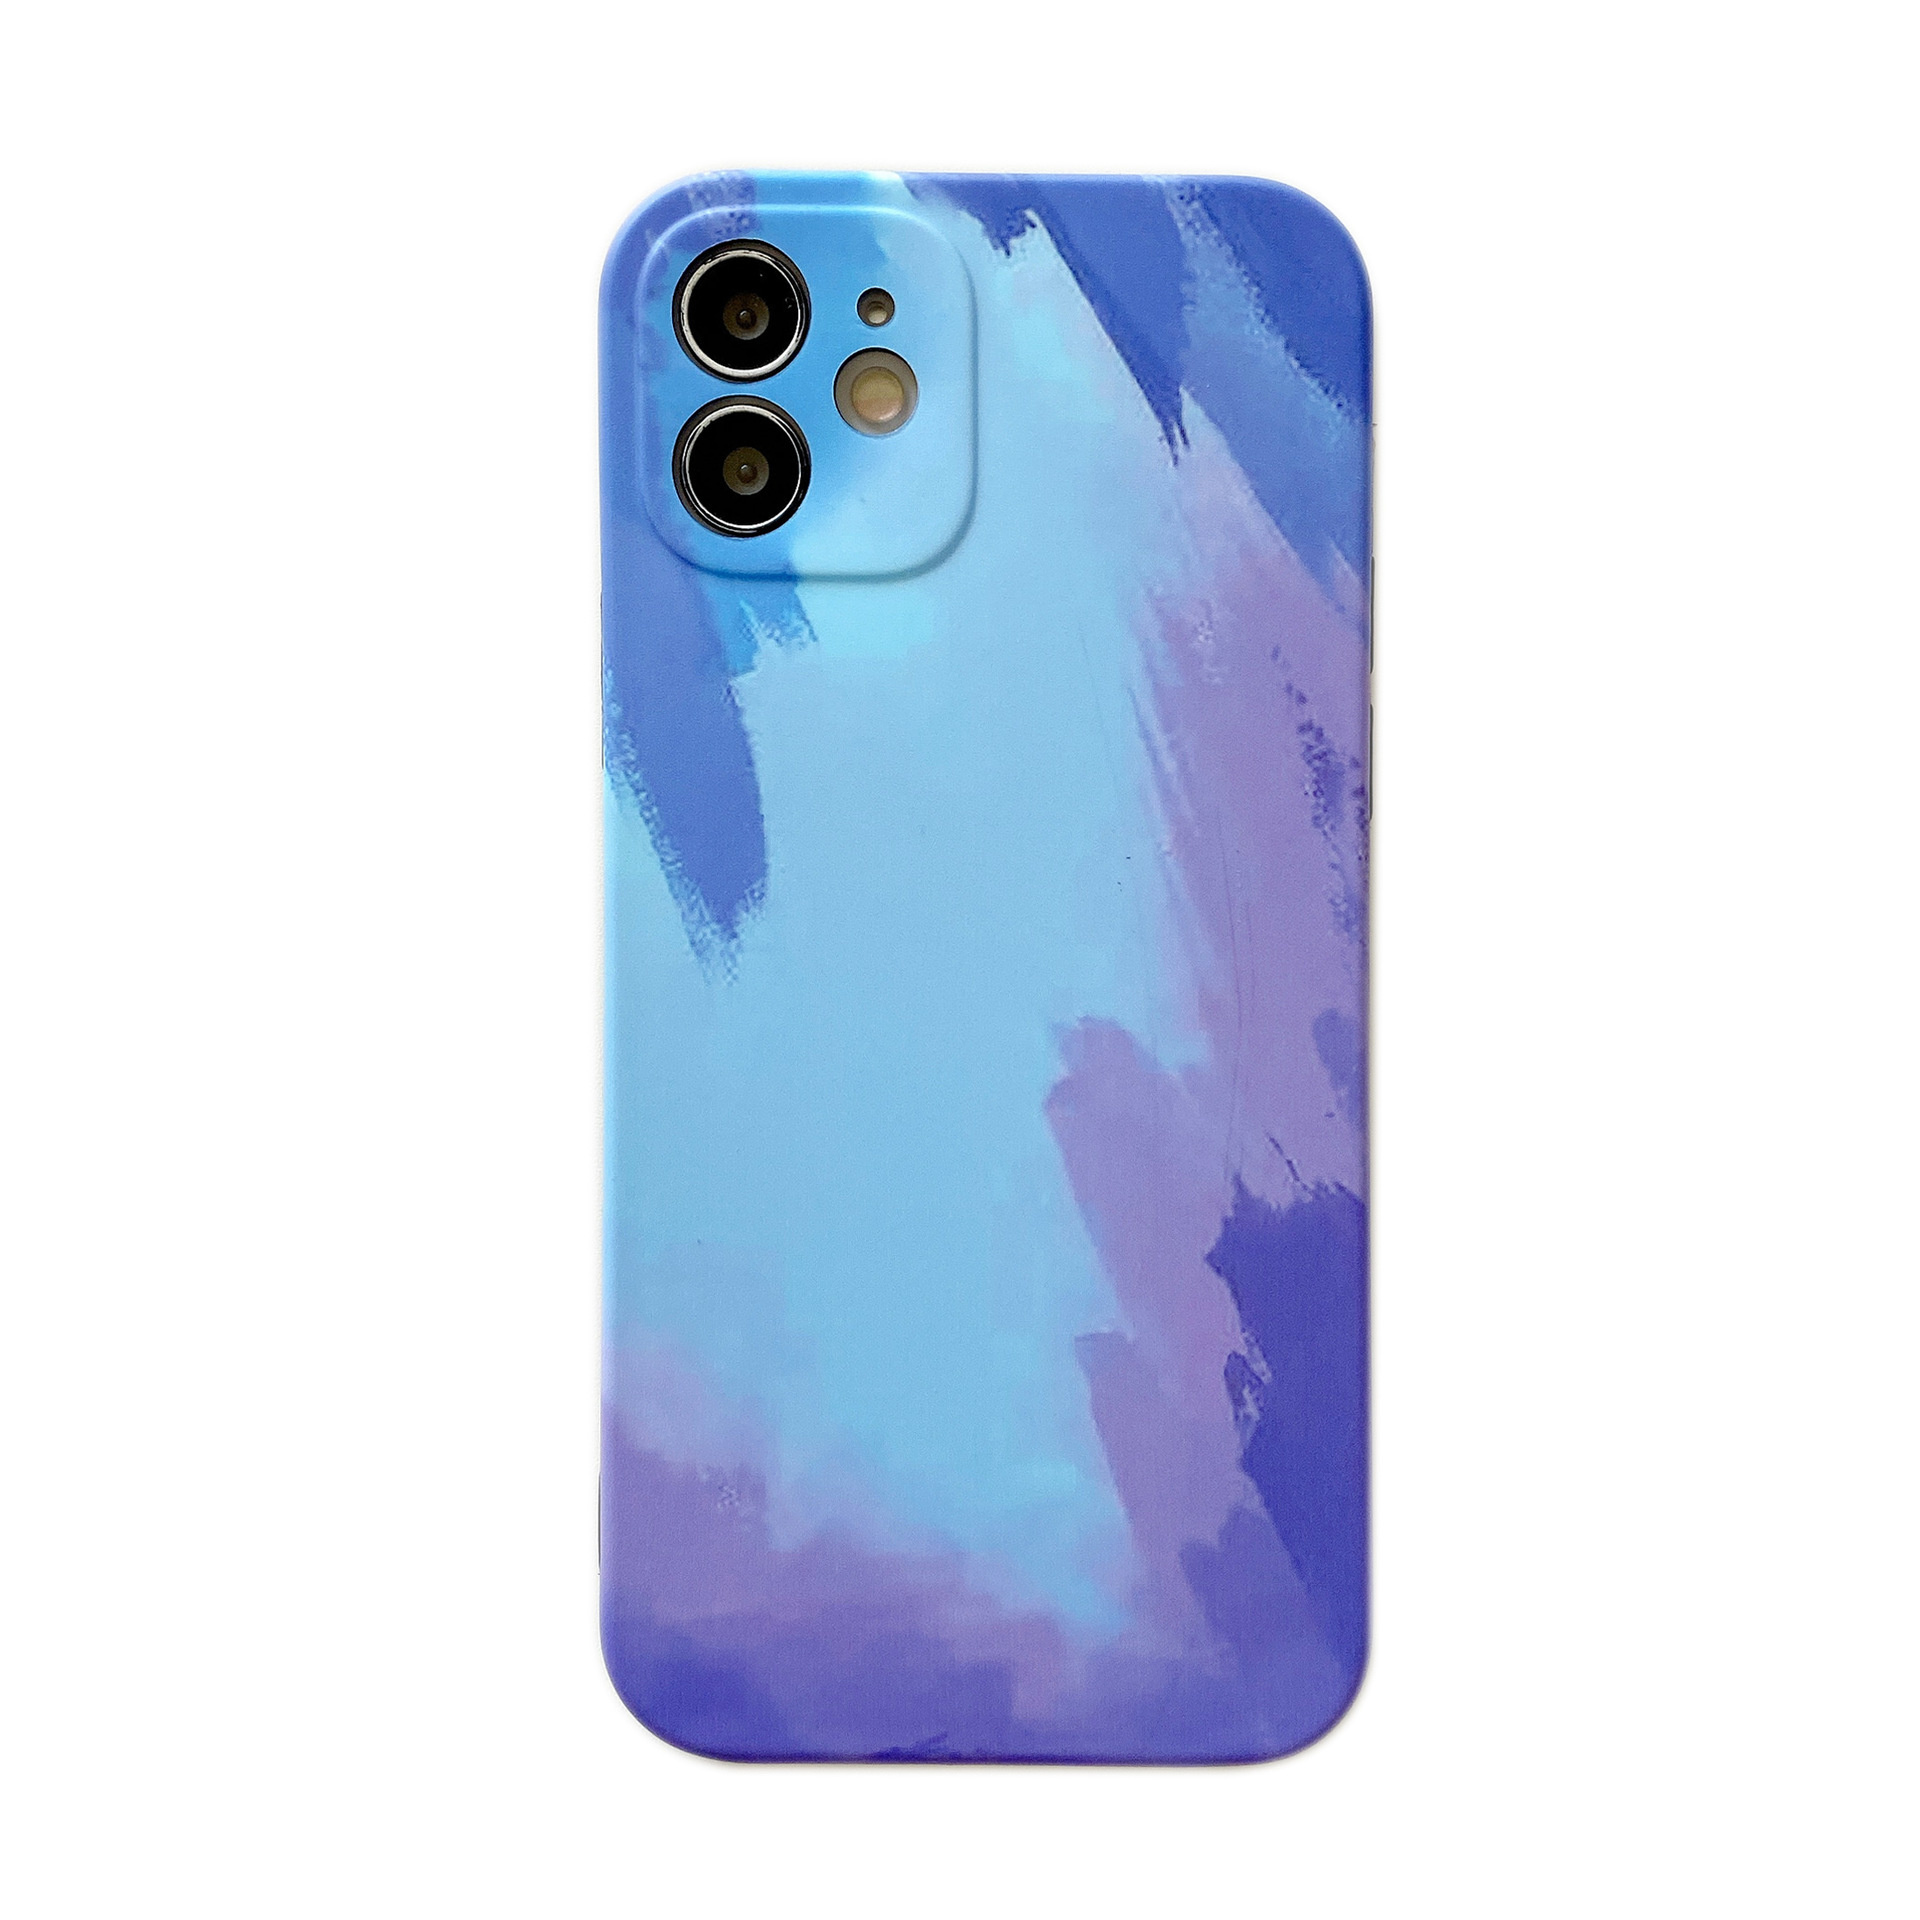 iPhone 13 Pro Back Cover Hoesje met Patroon - TPU - Siliconen - Backcover - Apple iPhone 13 Pro - Blauw / Lichtblauw